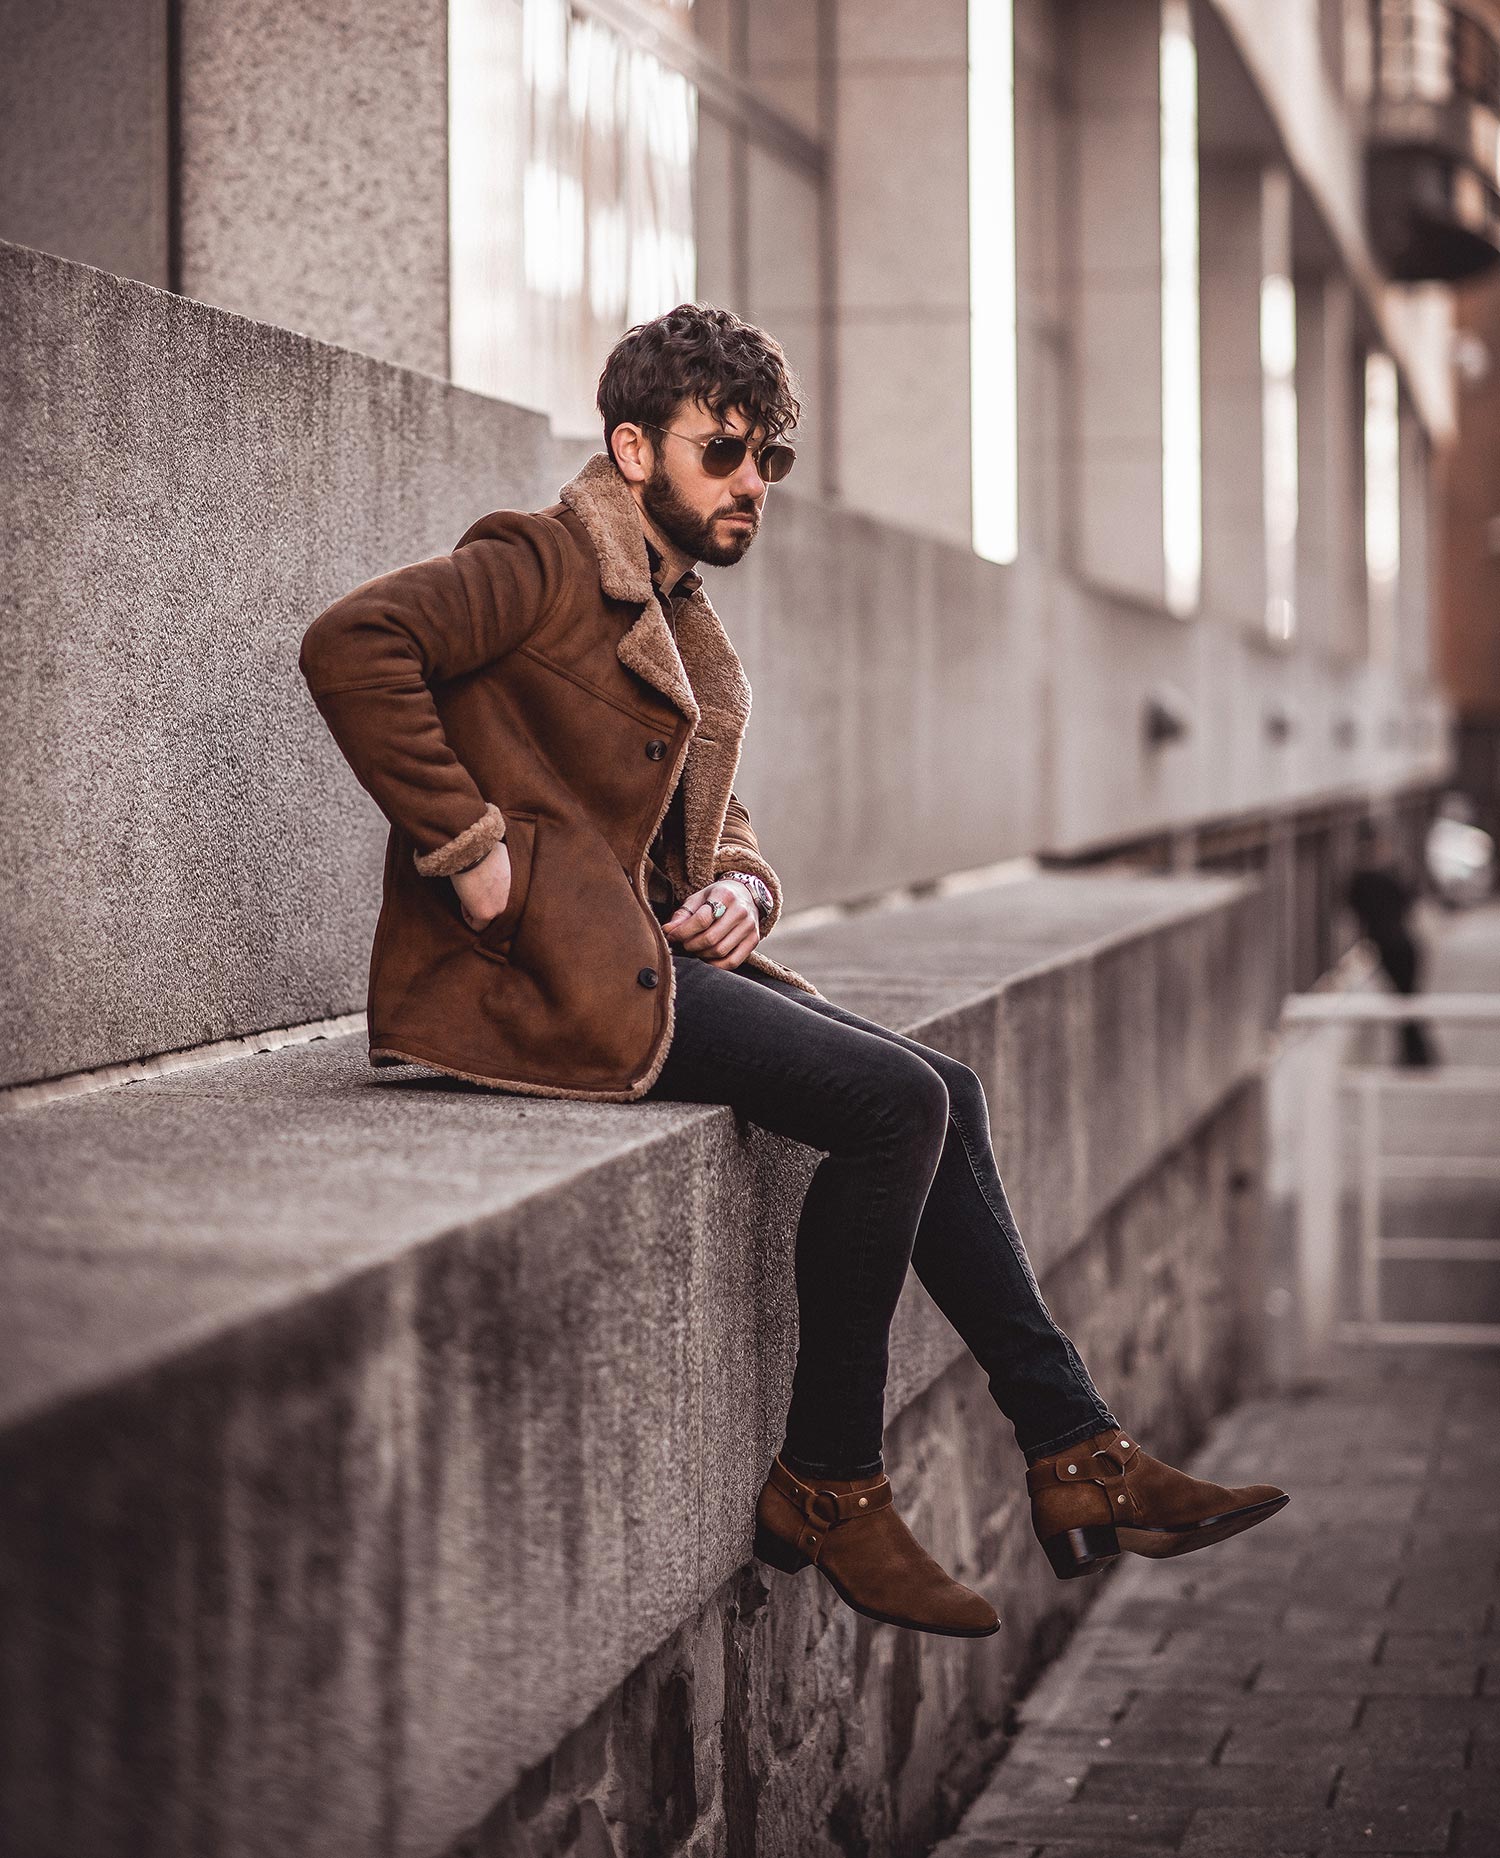 https://youraverageguystyle.com/wp-content/uploads/2020/08/Brown-And-Black-Outfit-1.jpg